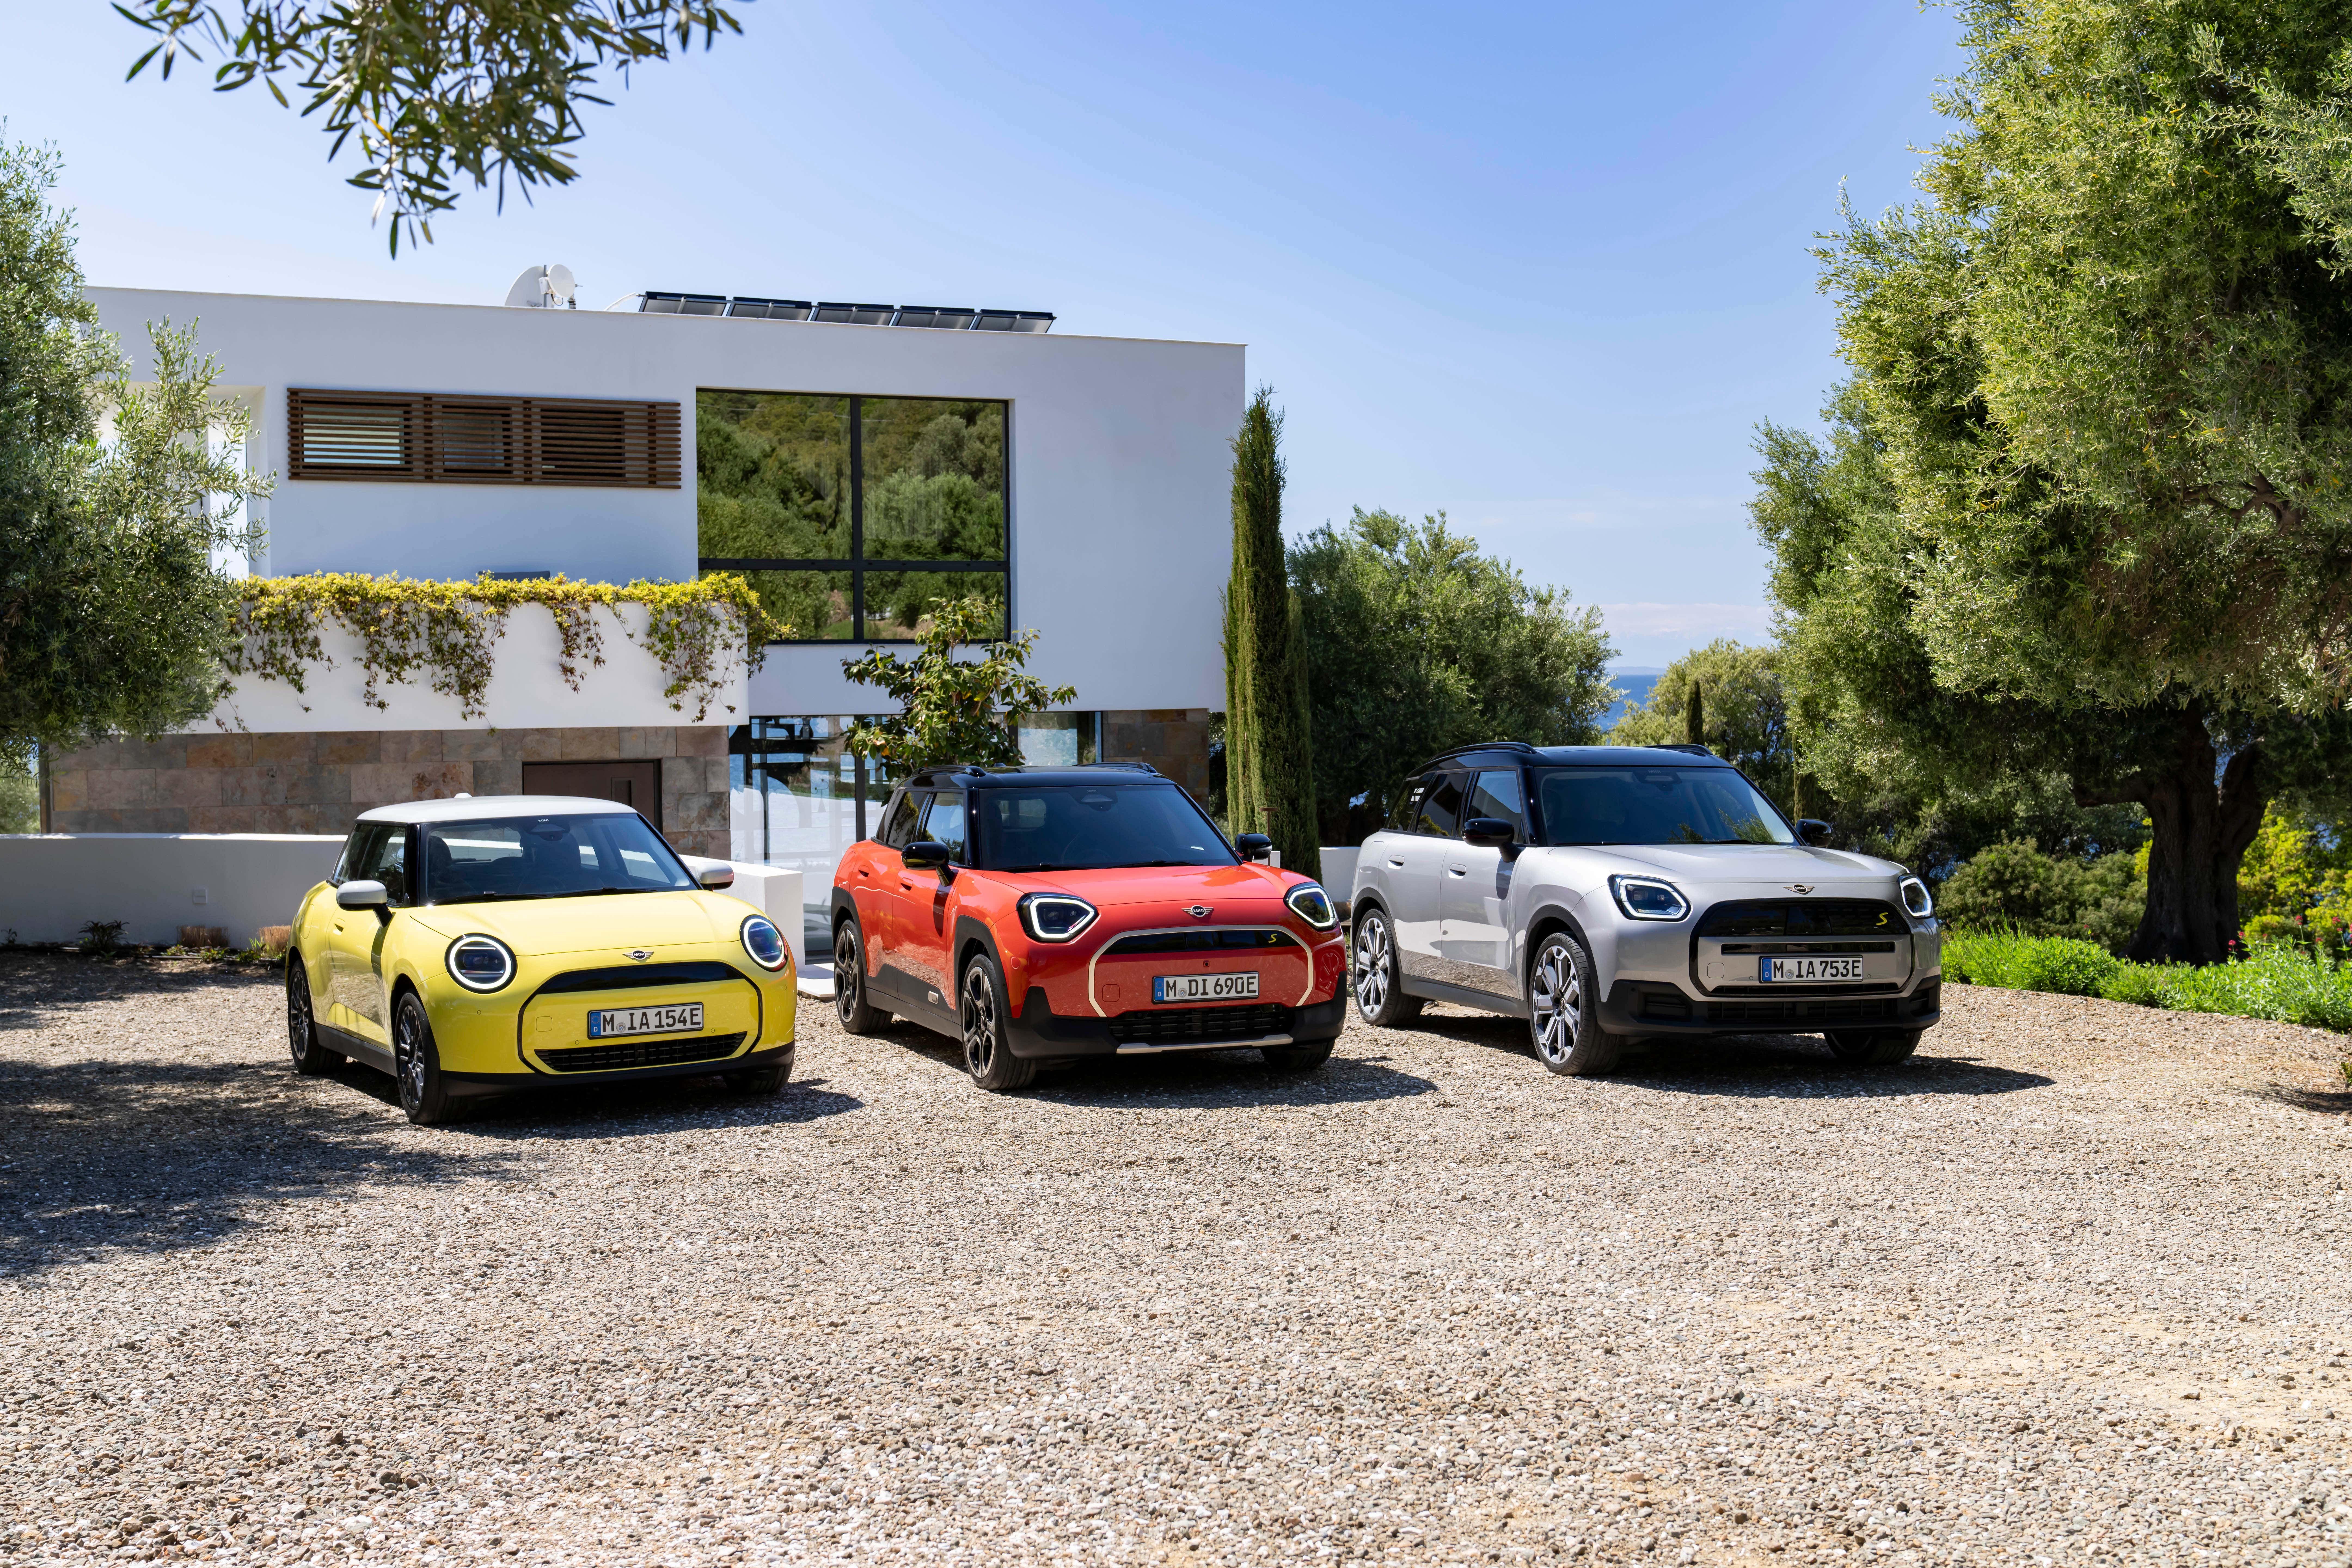 The new Mini family features a yellow Cooper, an orange Aceman and a silver Countryman